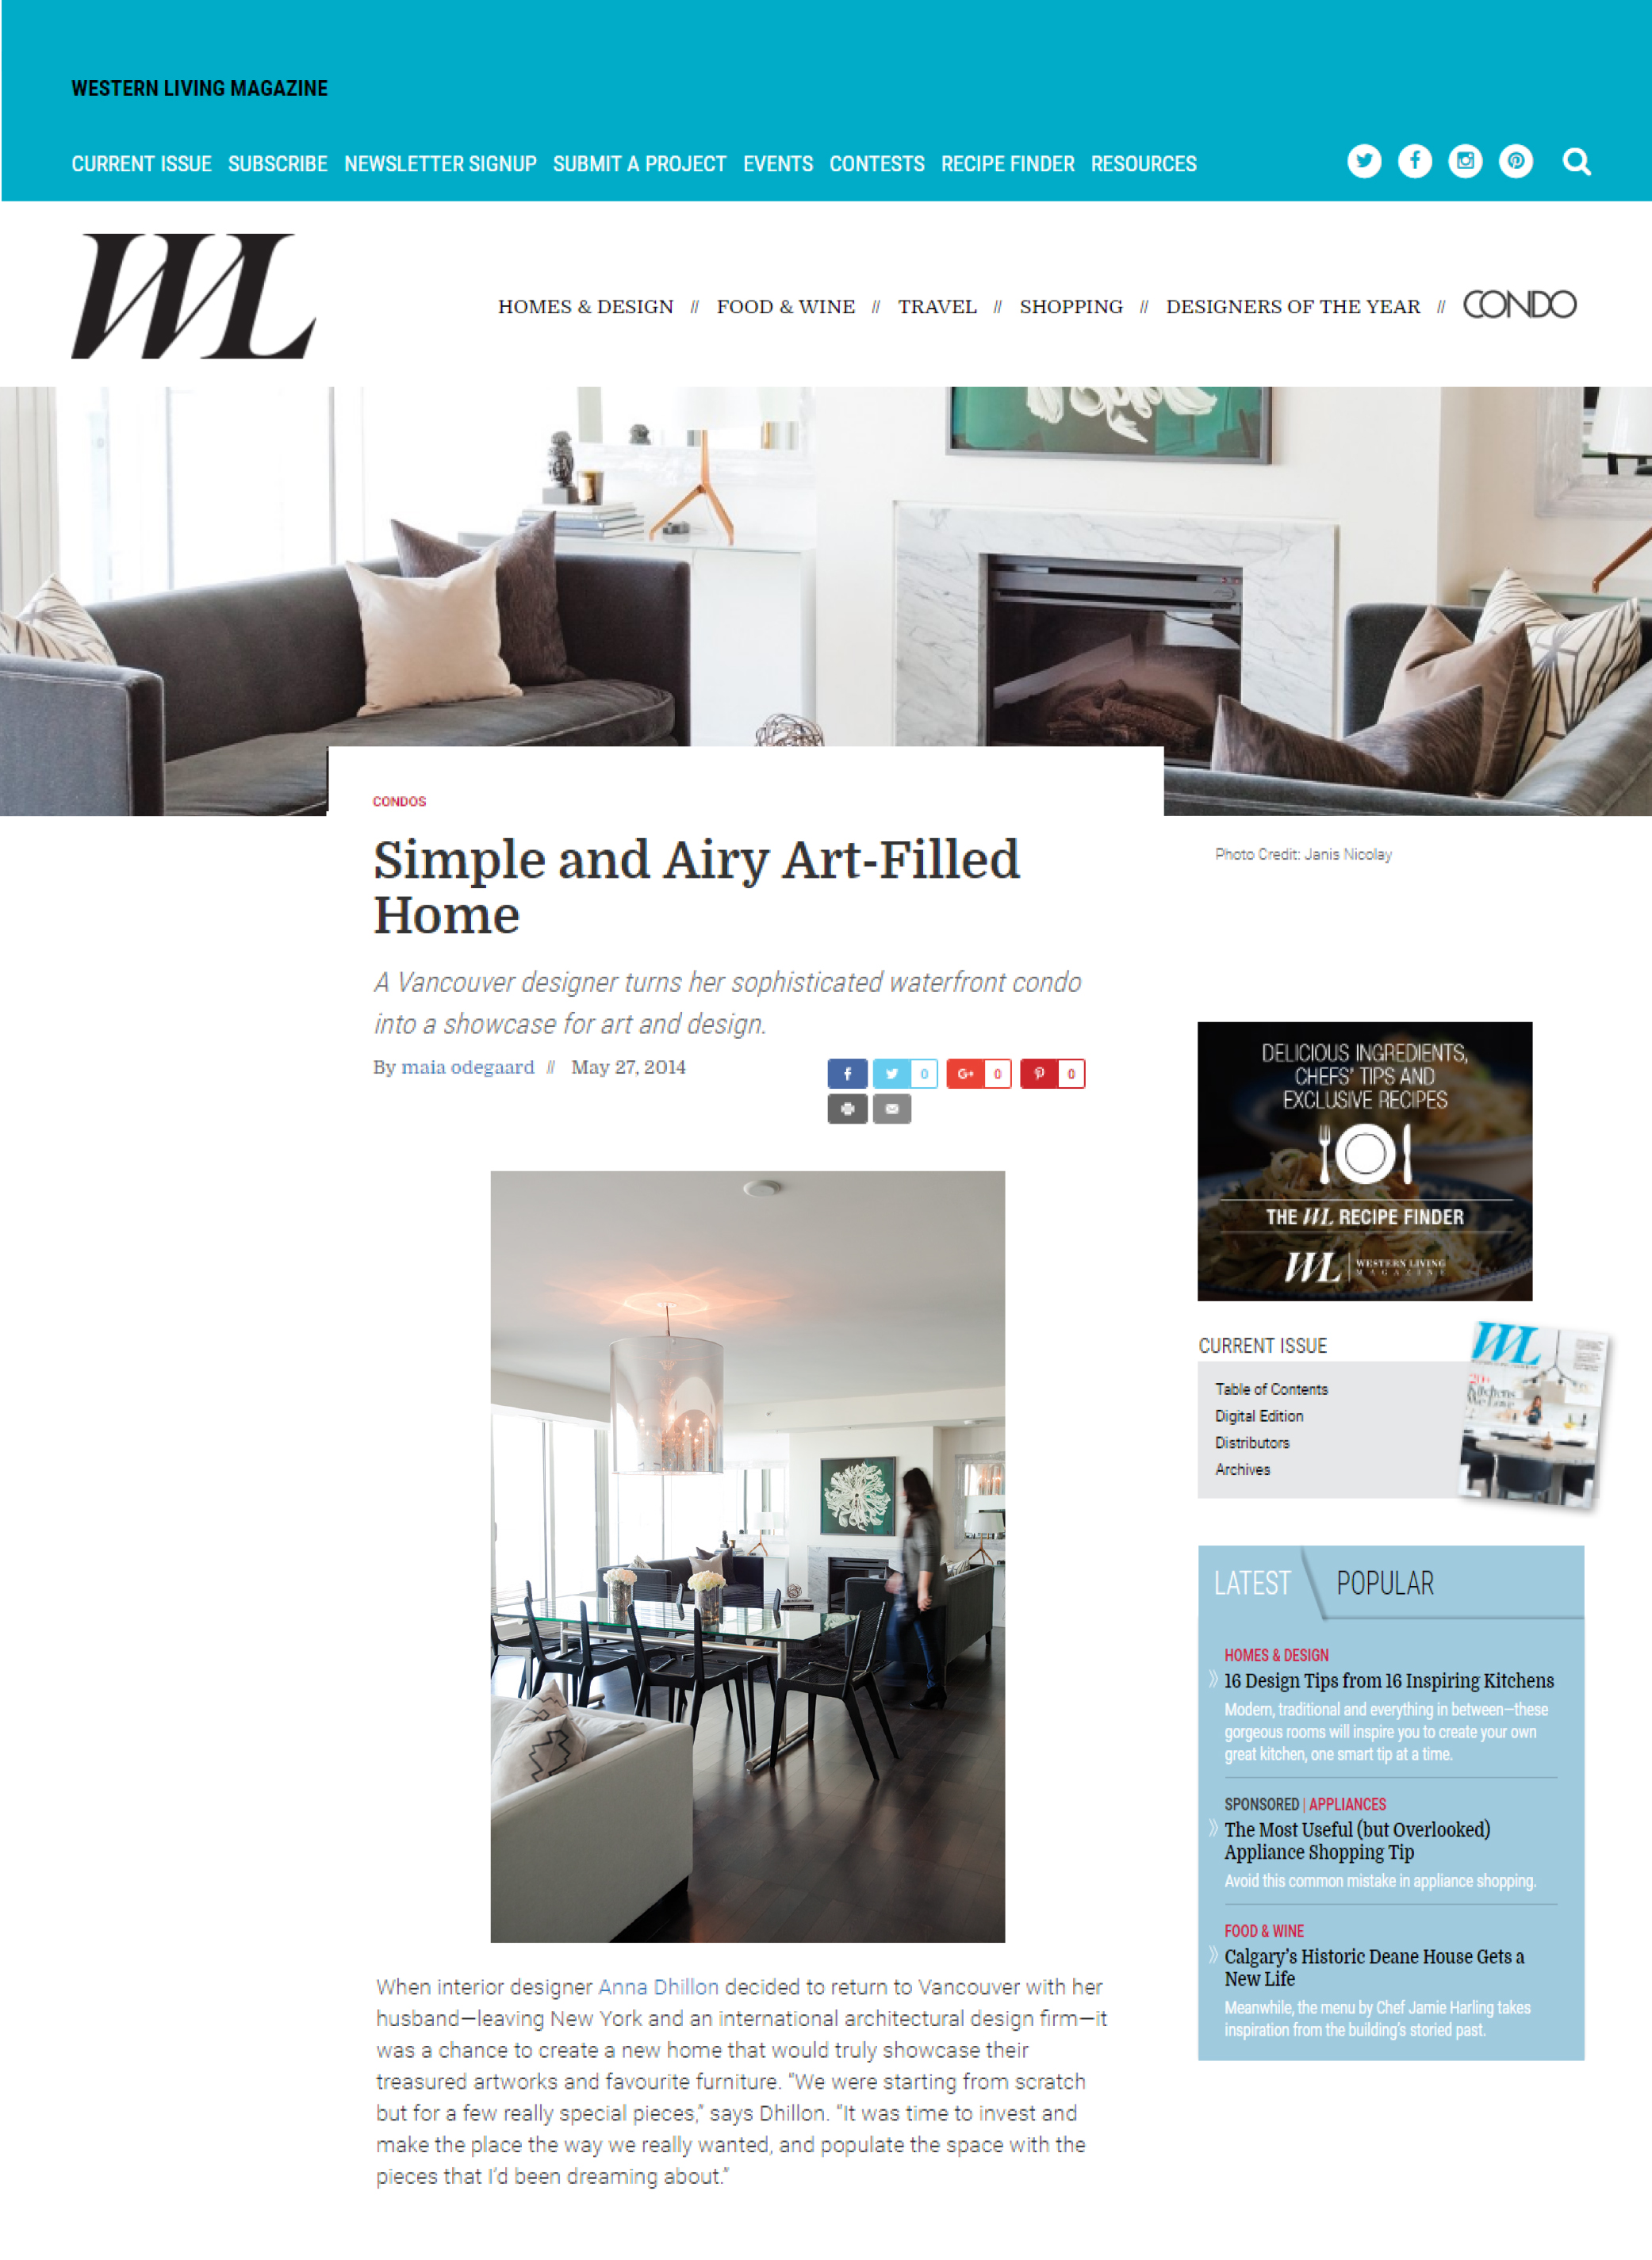 14_05-WLM-Simple_And_Airy_Art-Filled_Home.jpg